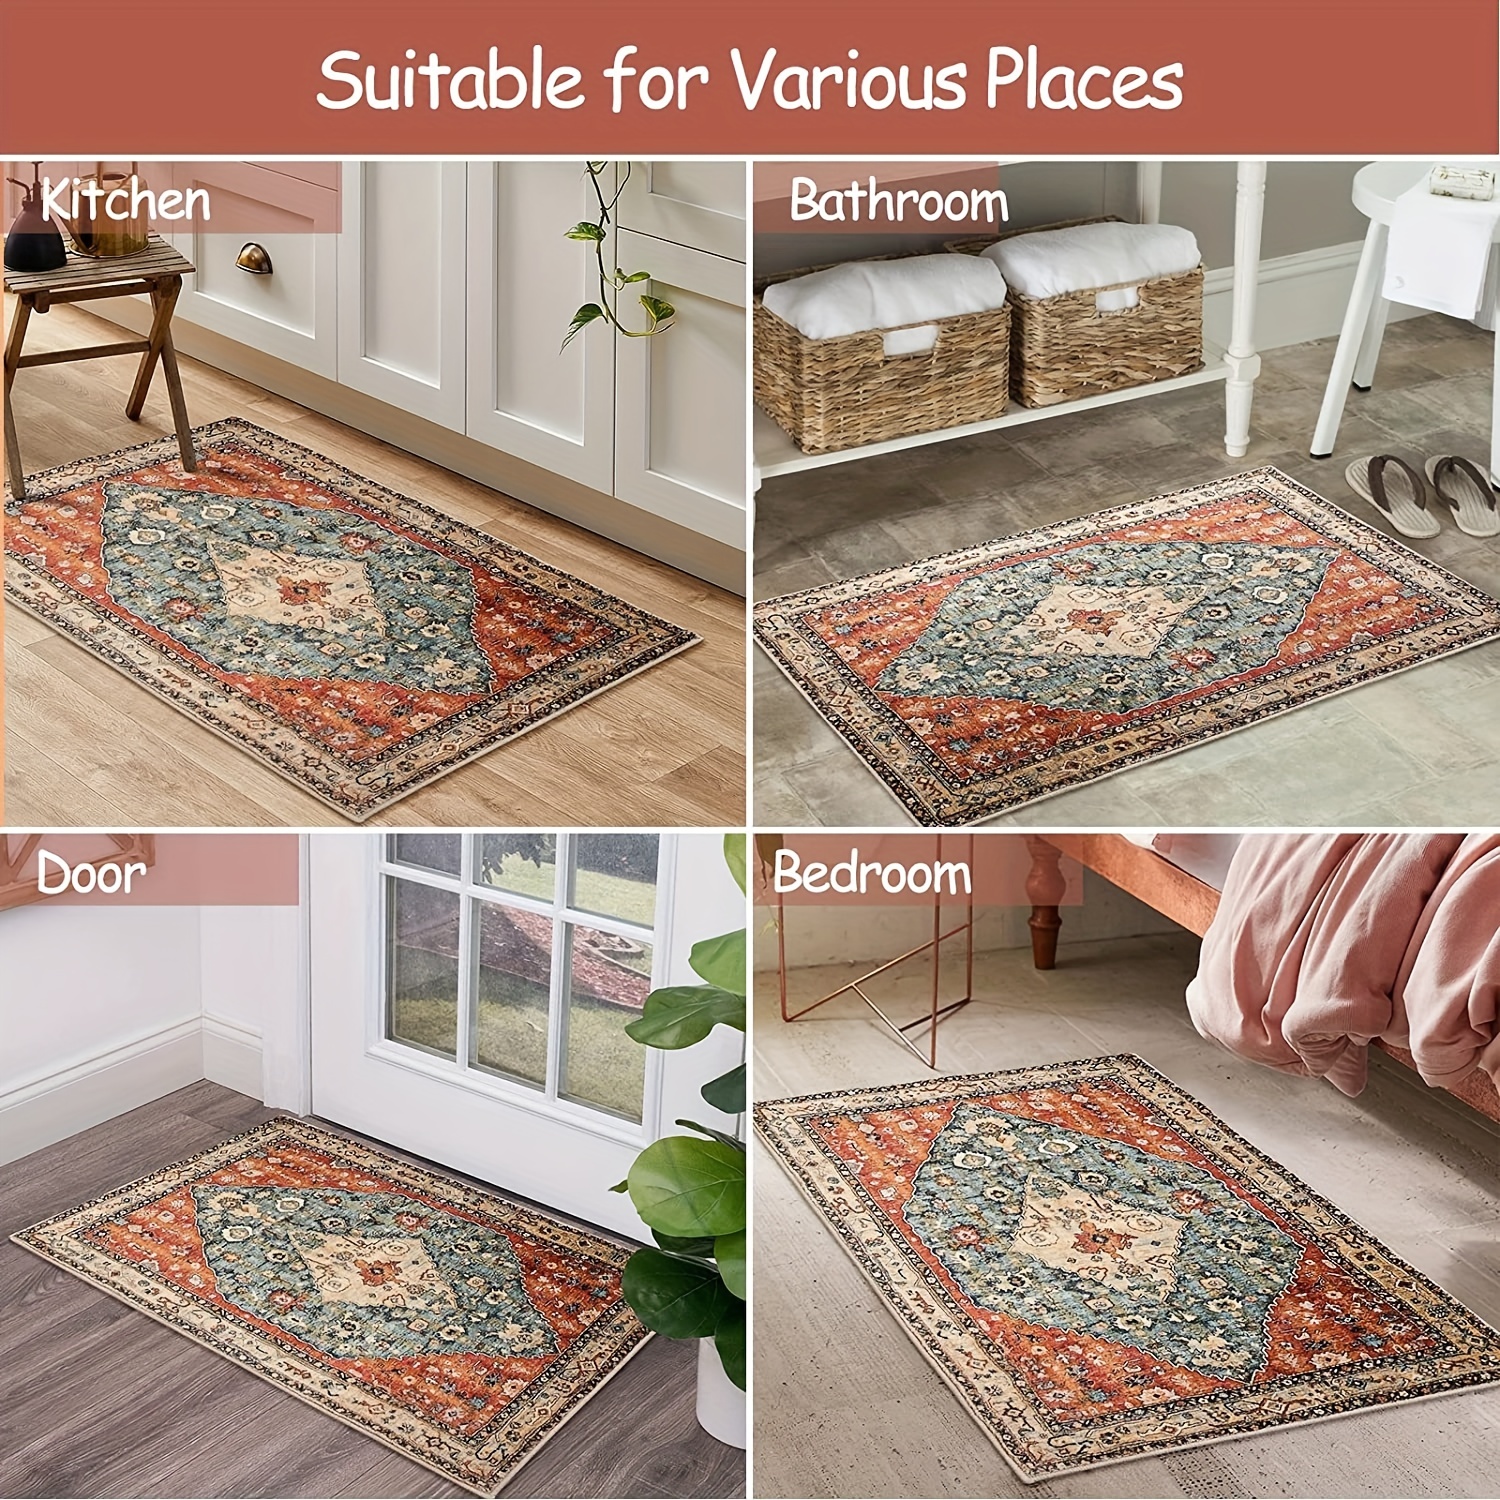 Oriental Kitchen Rugs Non Slip - 2x3 Entryway Rugs Indoor Printed Small Rugs